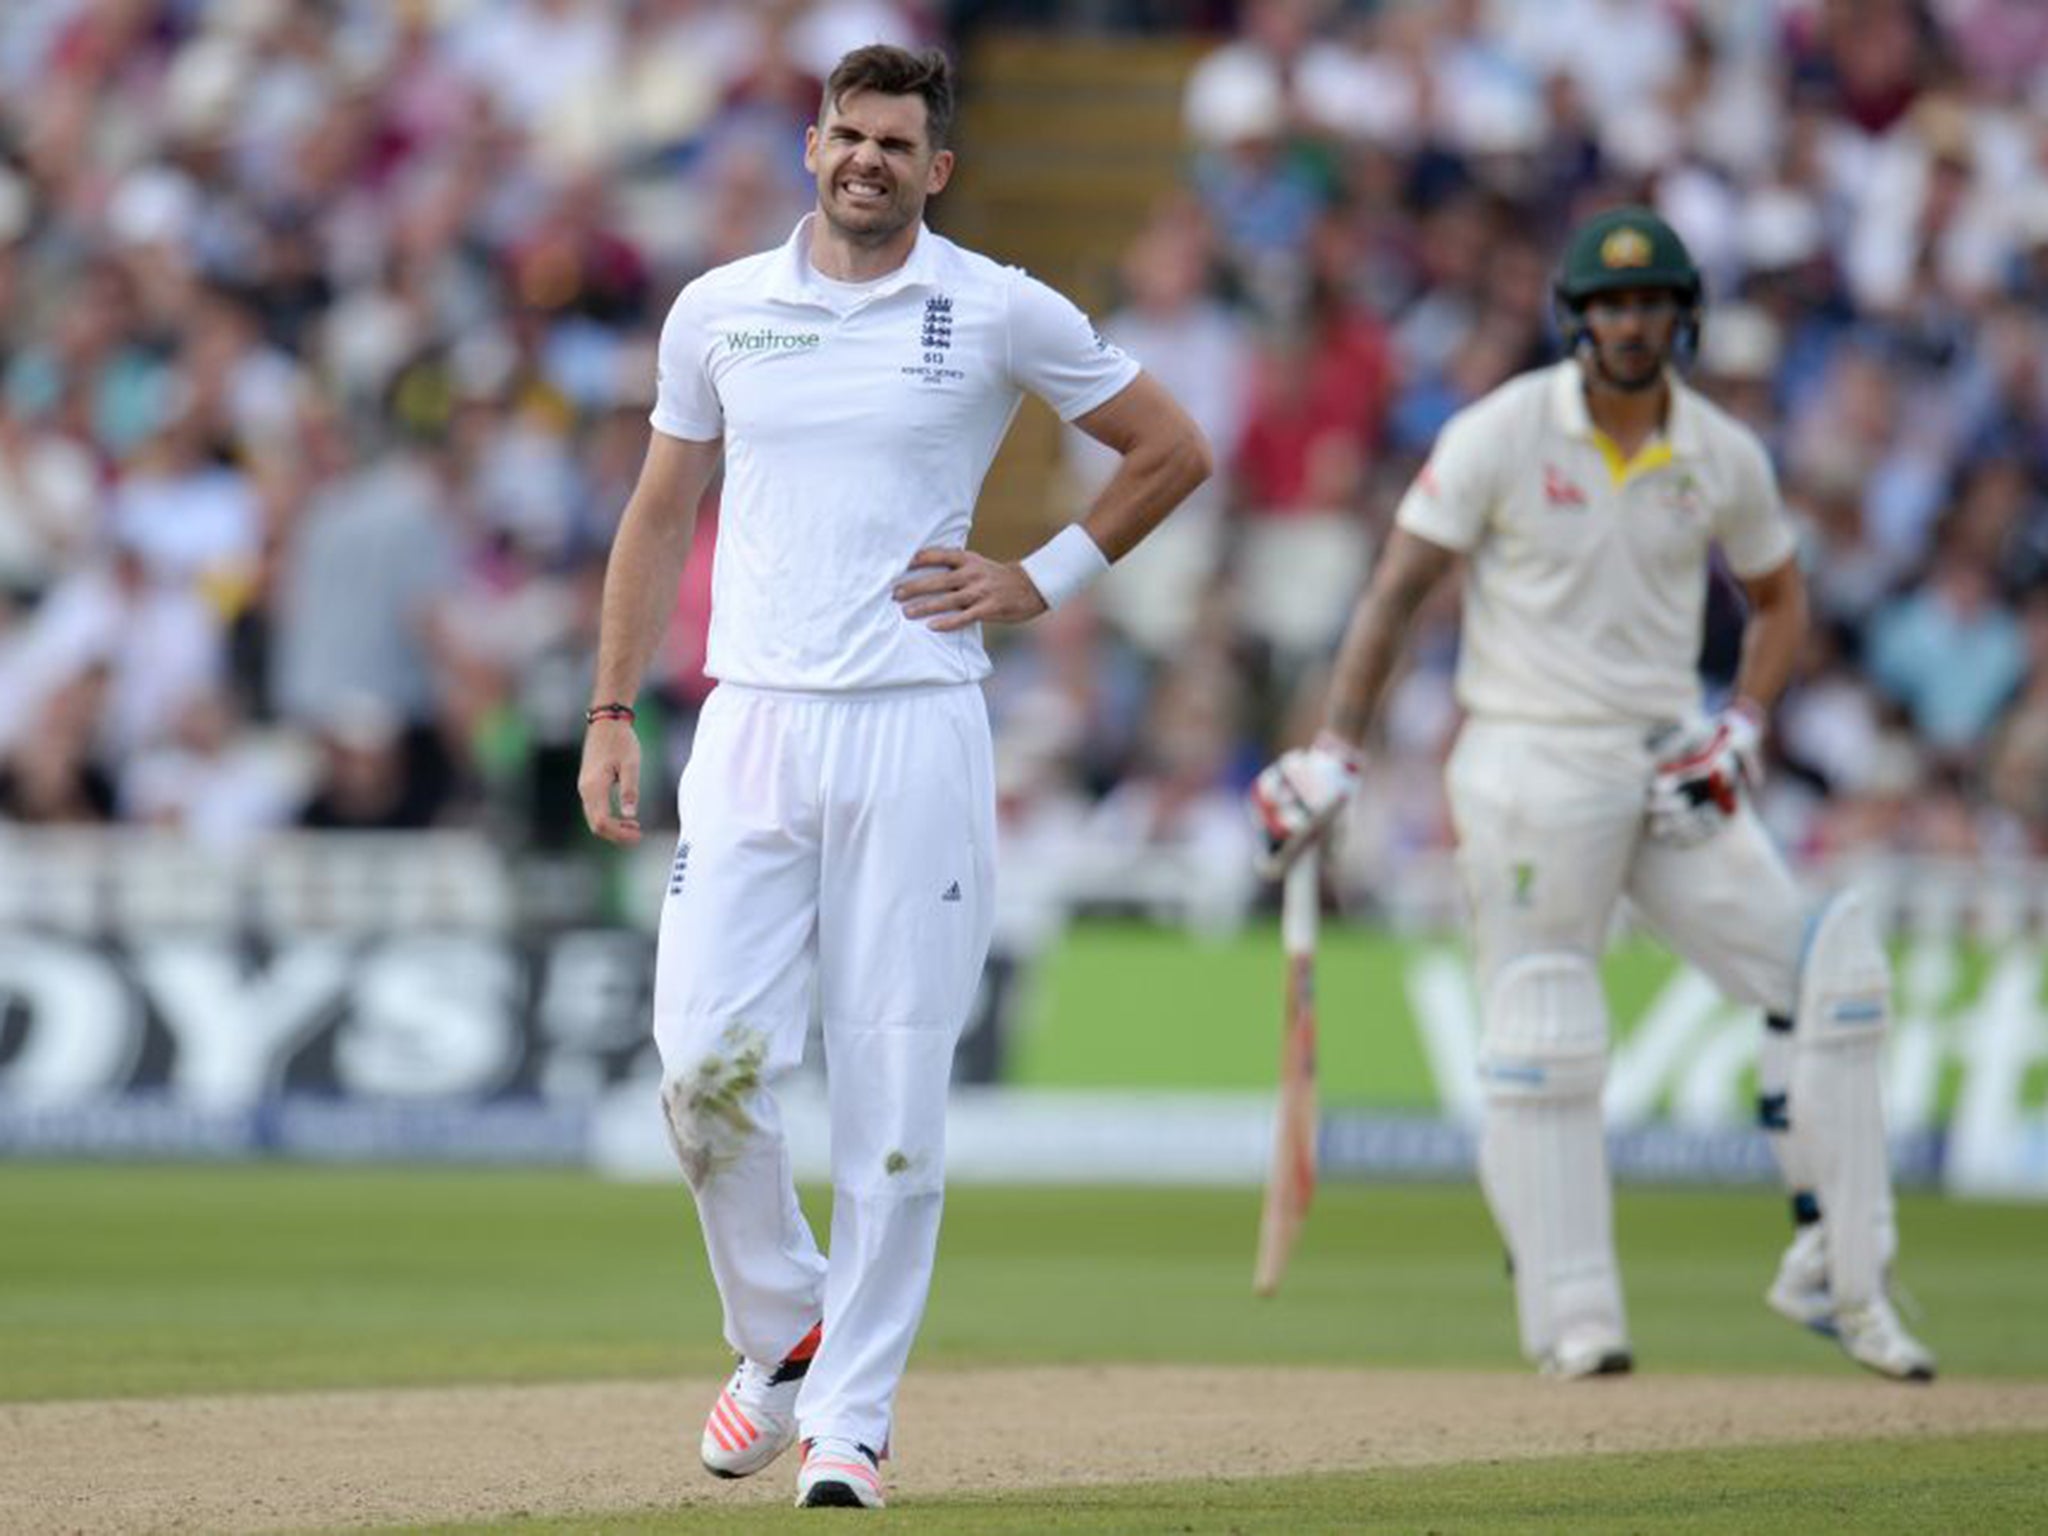 Jimmy Anderson could be out of action for up to six weeks